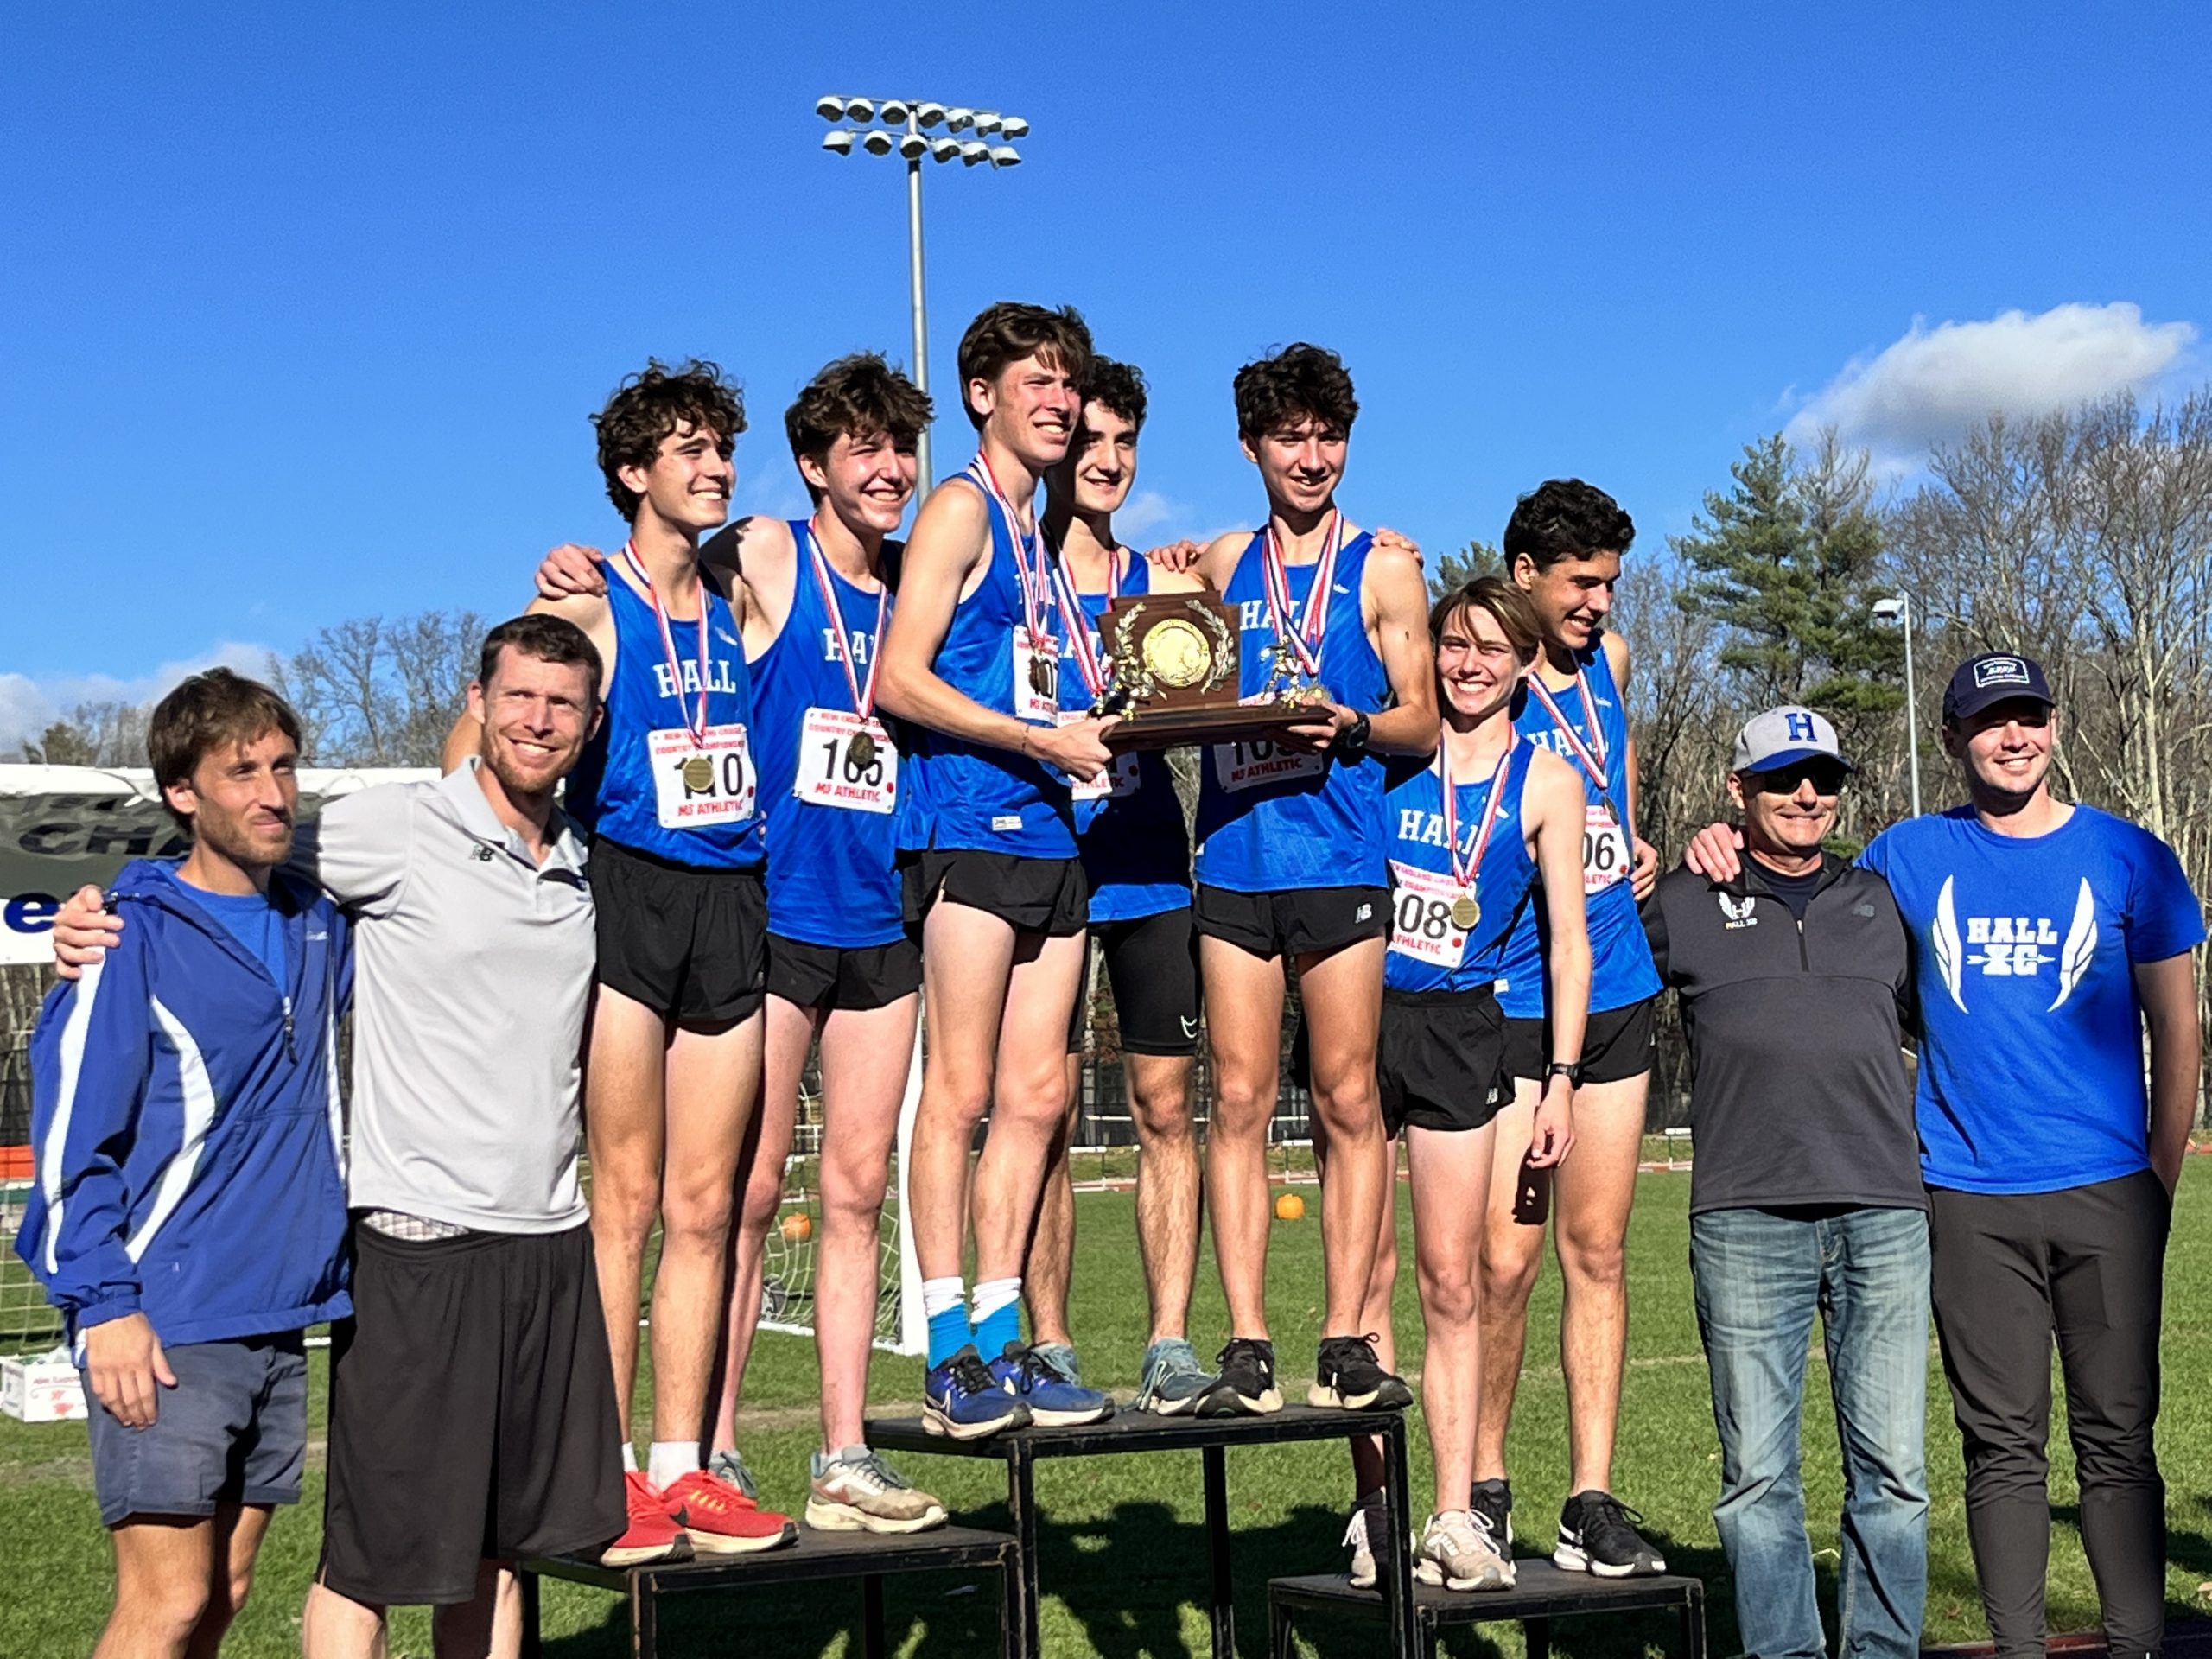 Hall Boys Cross Country Wins New England Championship for First Time